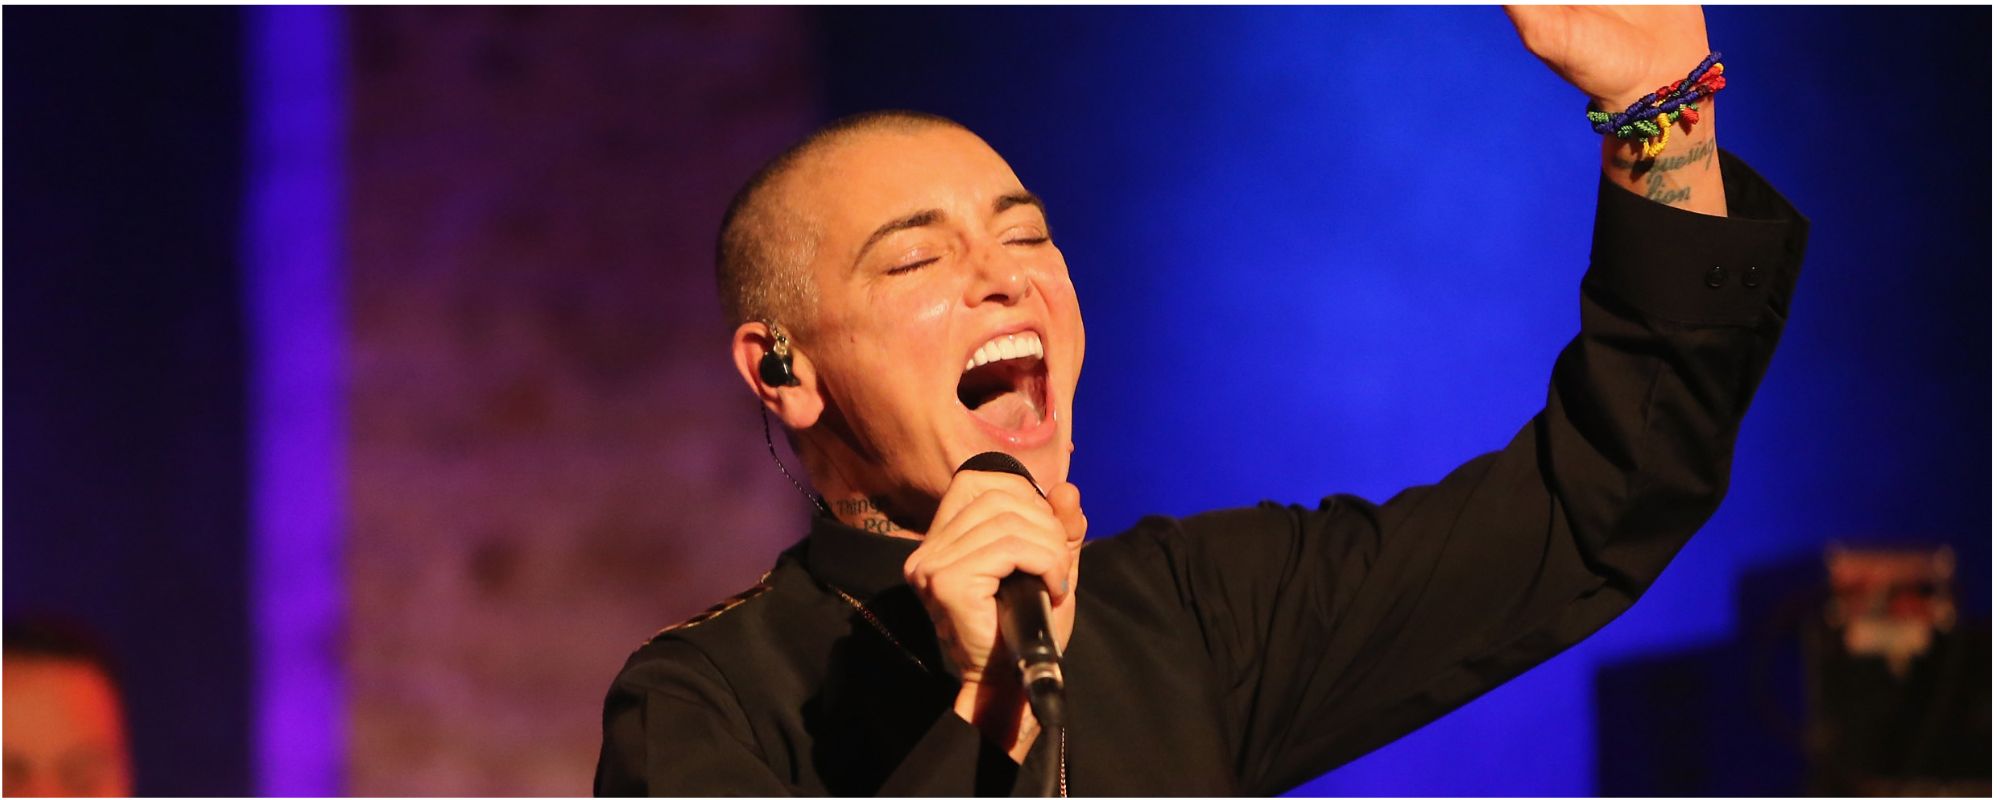 The 10 Best Sinéad O’Connor Quotes: Fierce Words to Live By